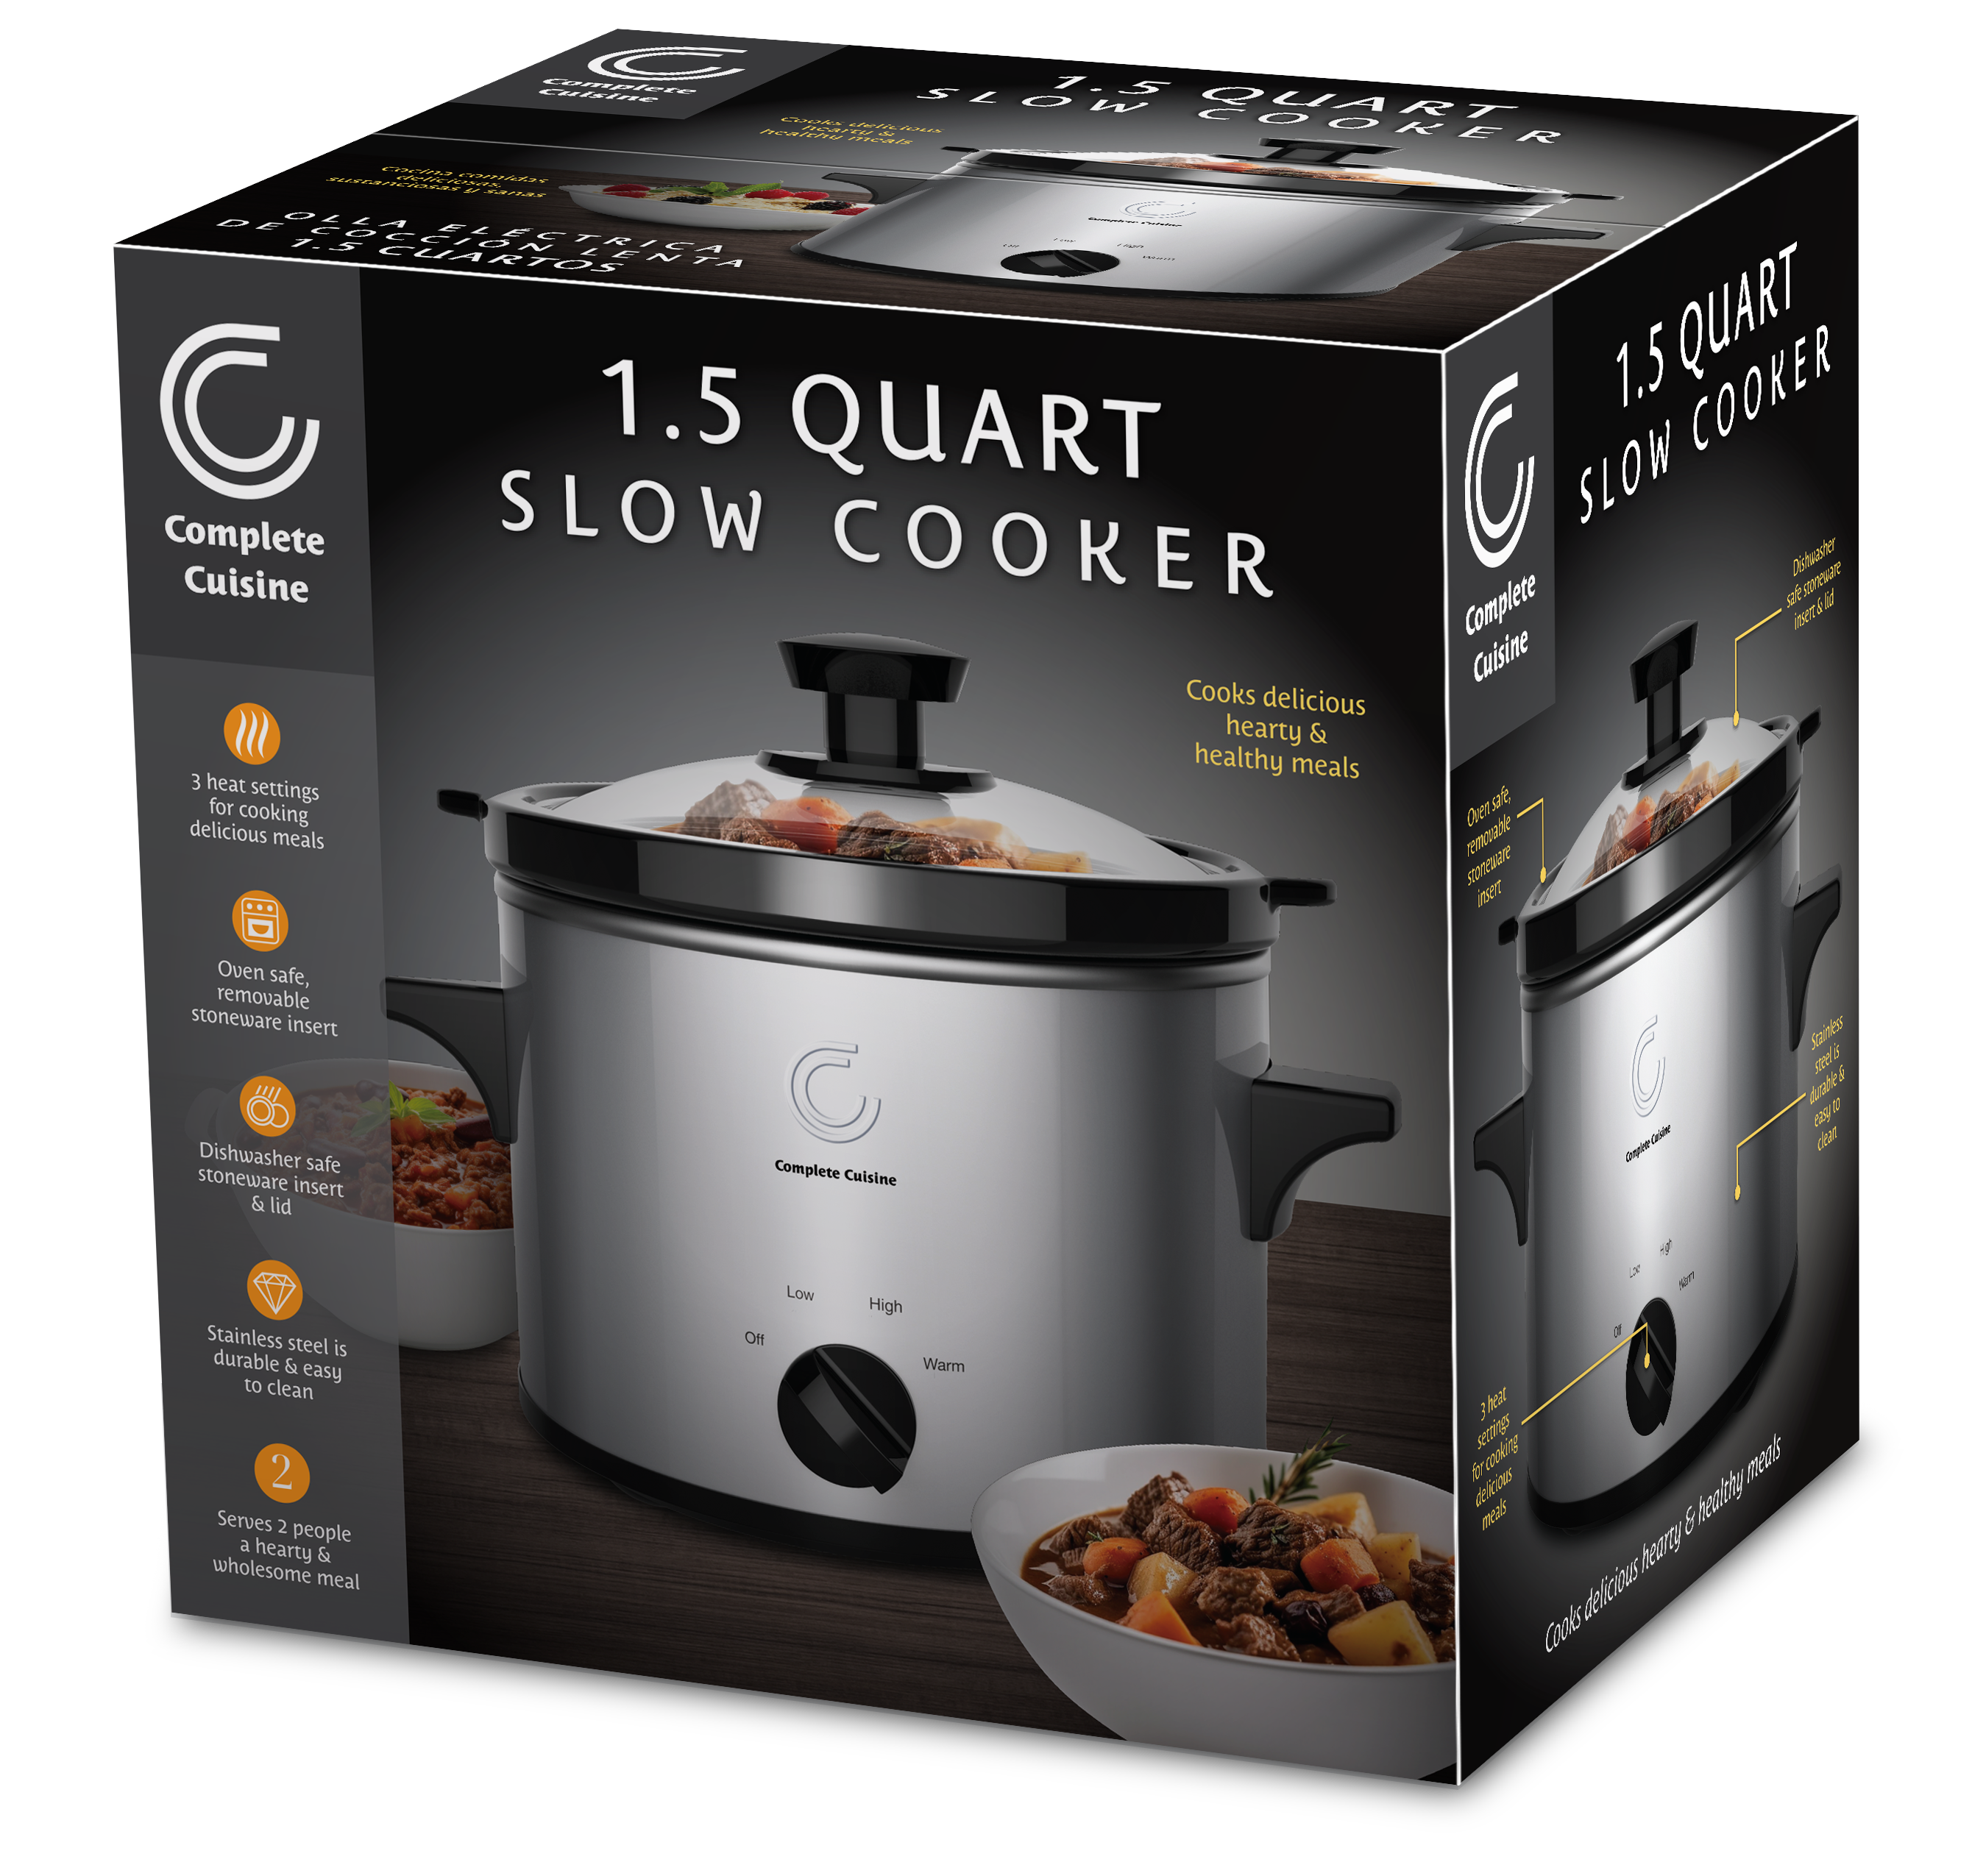 Complete Cuisine  Gourmet Slow Cooker with Adjustable Temp, Entrees, Sauces, Stews & Dips, Dishwasher Safe Glass Lid & Crock, 1.5 Quart, Stainless Steel